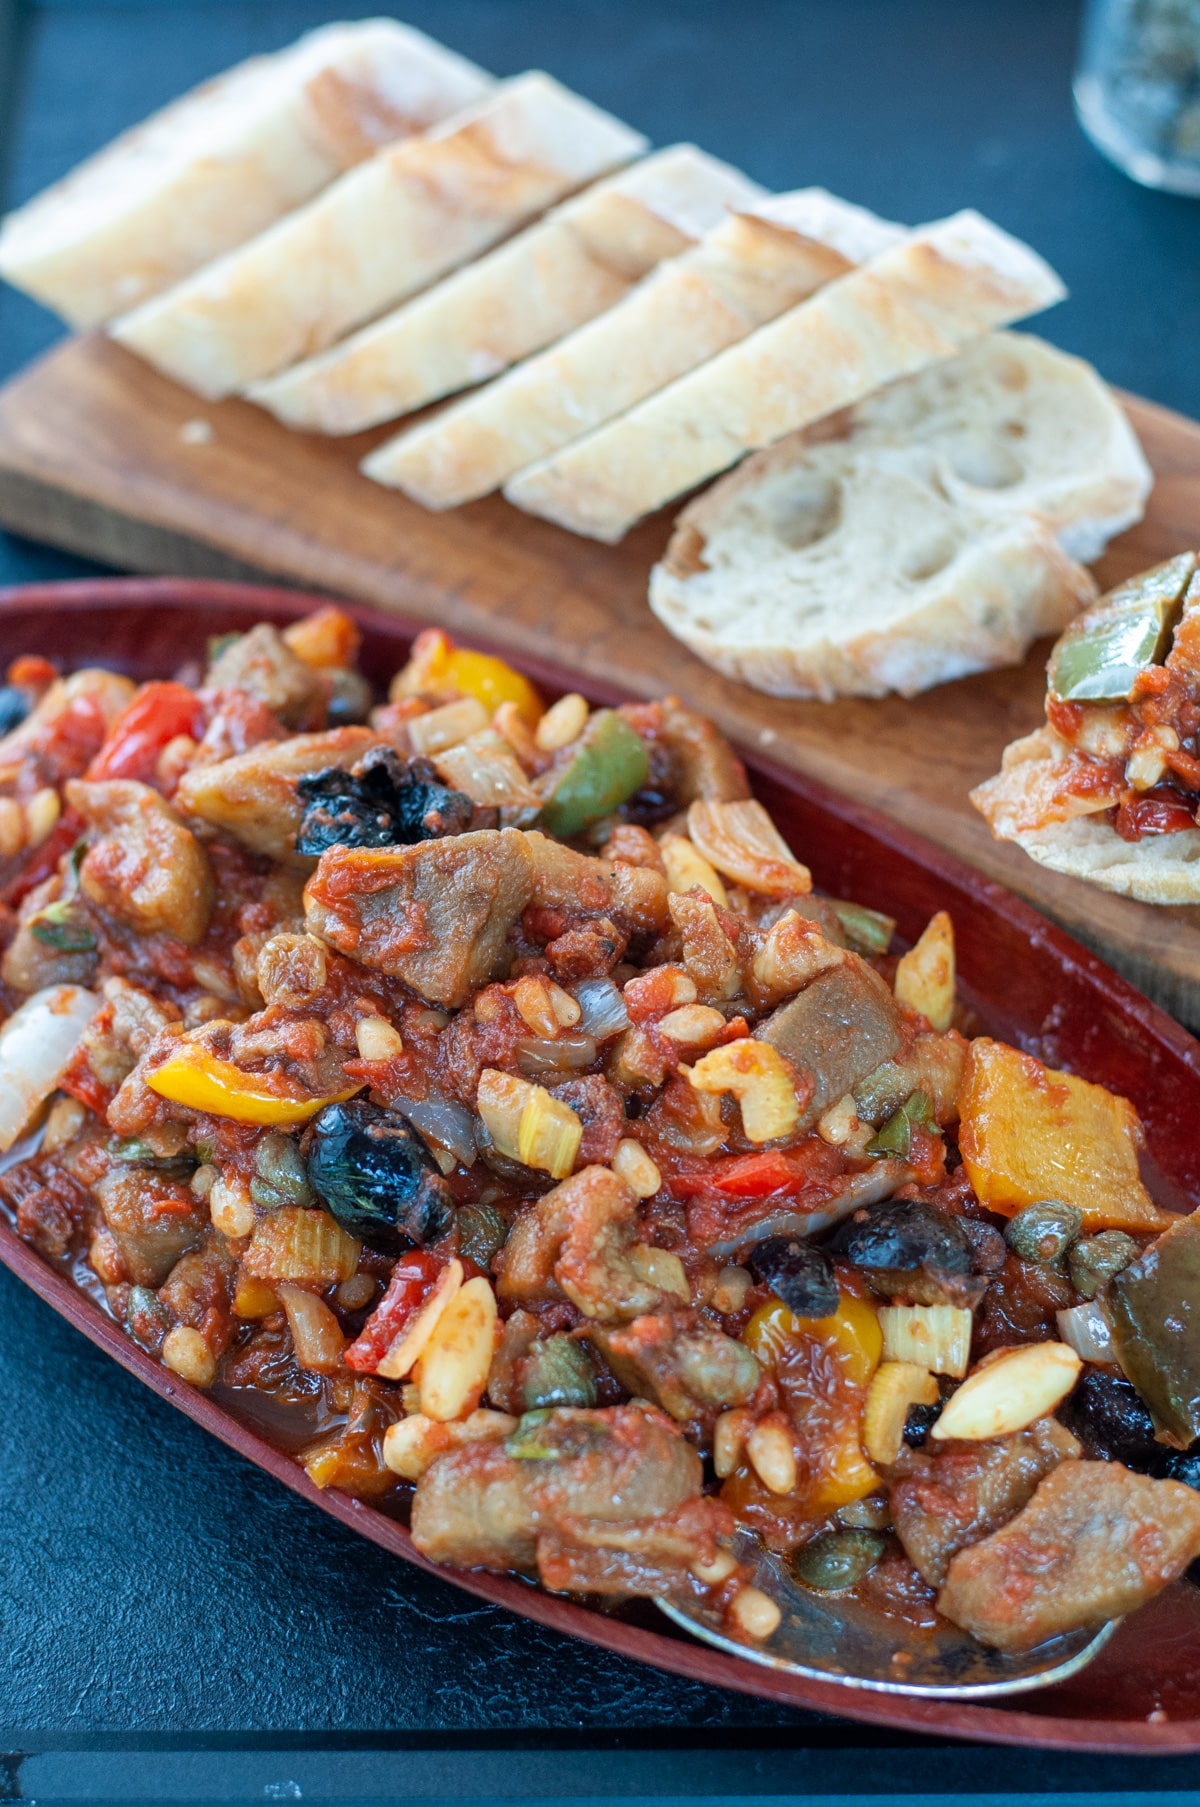 Vegetable caponata served on a try with some crusty bread in the background